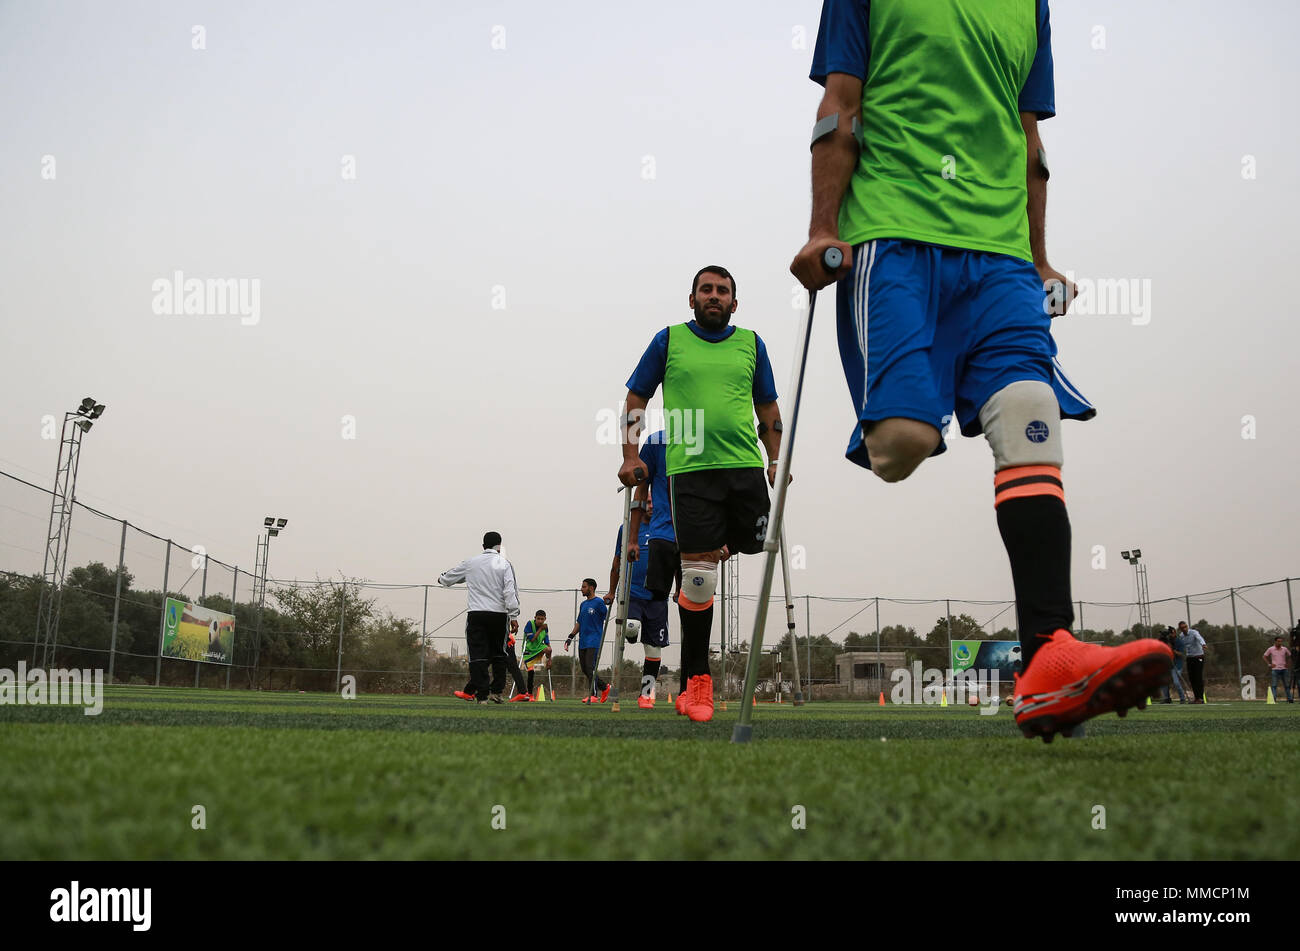 Gaza. 10th May, 2018. Palestinian amputee soccer players take part in a training session of their team at Municipality Stadium in Deir Al Balah, in the central Gaza Strip, on May 10, 2018. For the first time in the Palestinian Gaza Strip, a football team of male amputees was recently formed to lay the foundation for such a sport in the Israeli-blockaded territory. The 12-player team, named 'The Heroes', could be a glimmer of hope for many young people with amputations caused by frequent rounds of violence with Israel and other accidents. Credit: Stringer/Xinhua/Alamy Live News Stock Photo